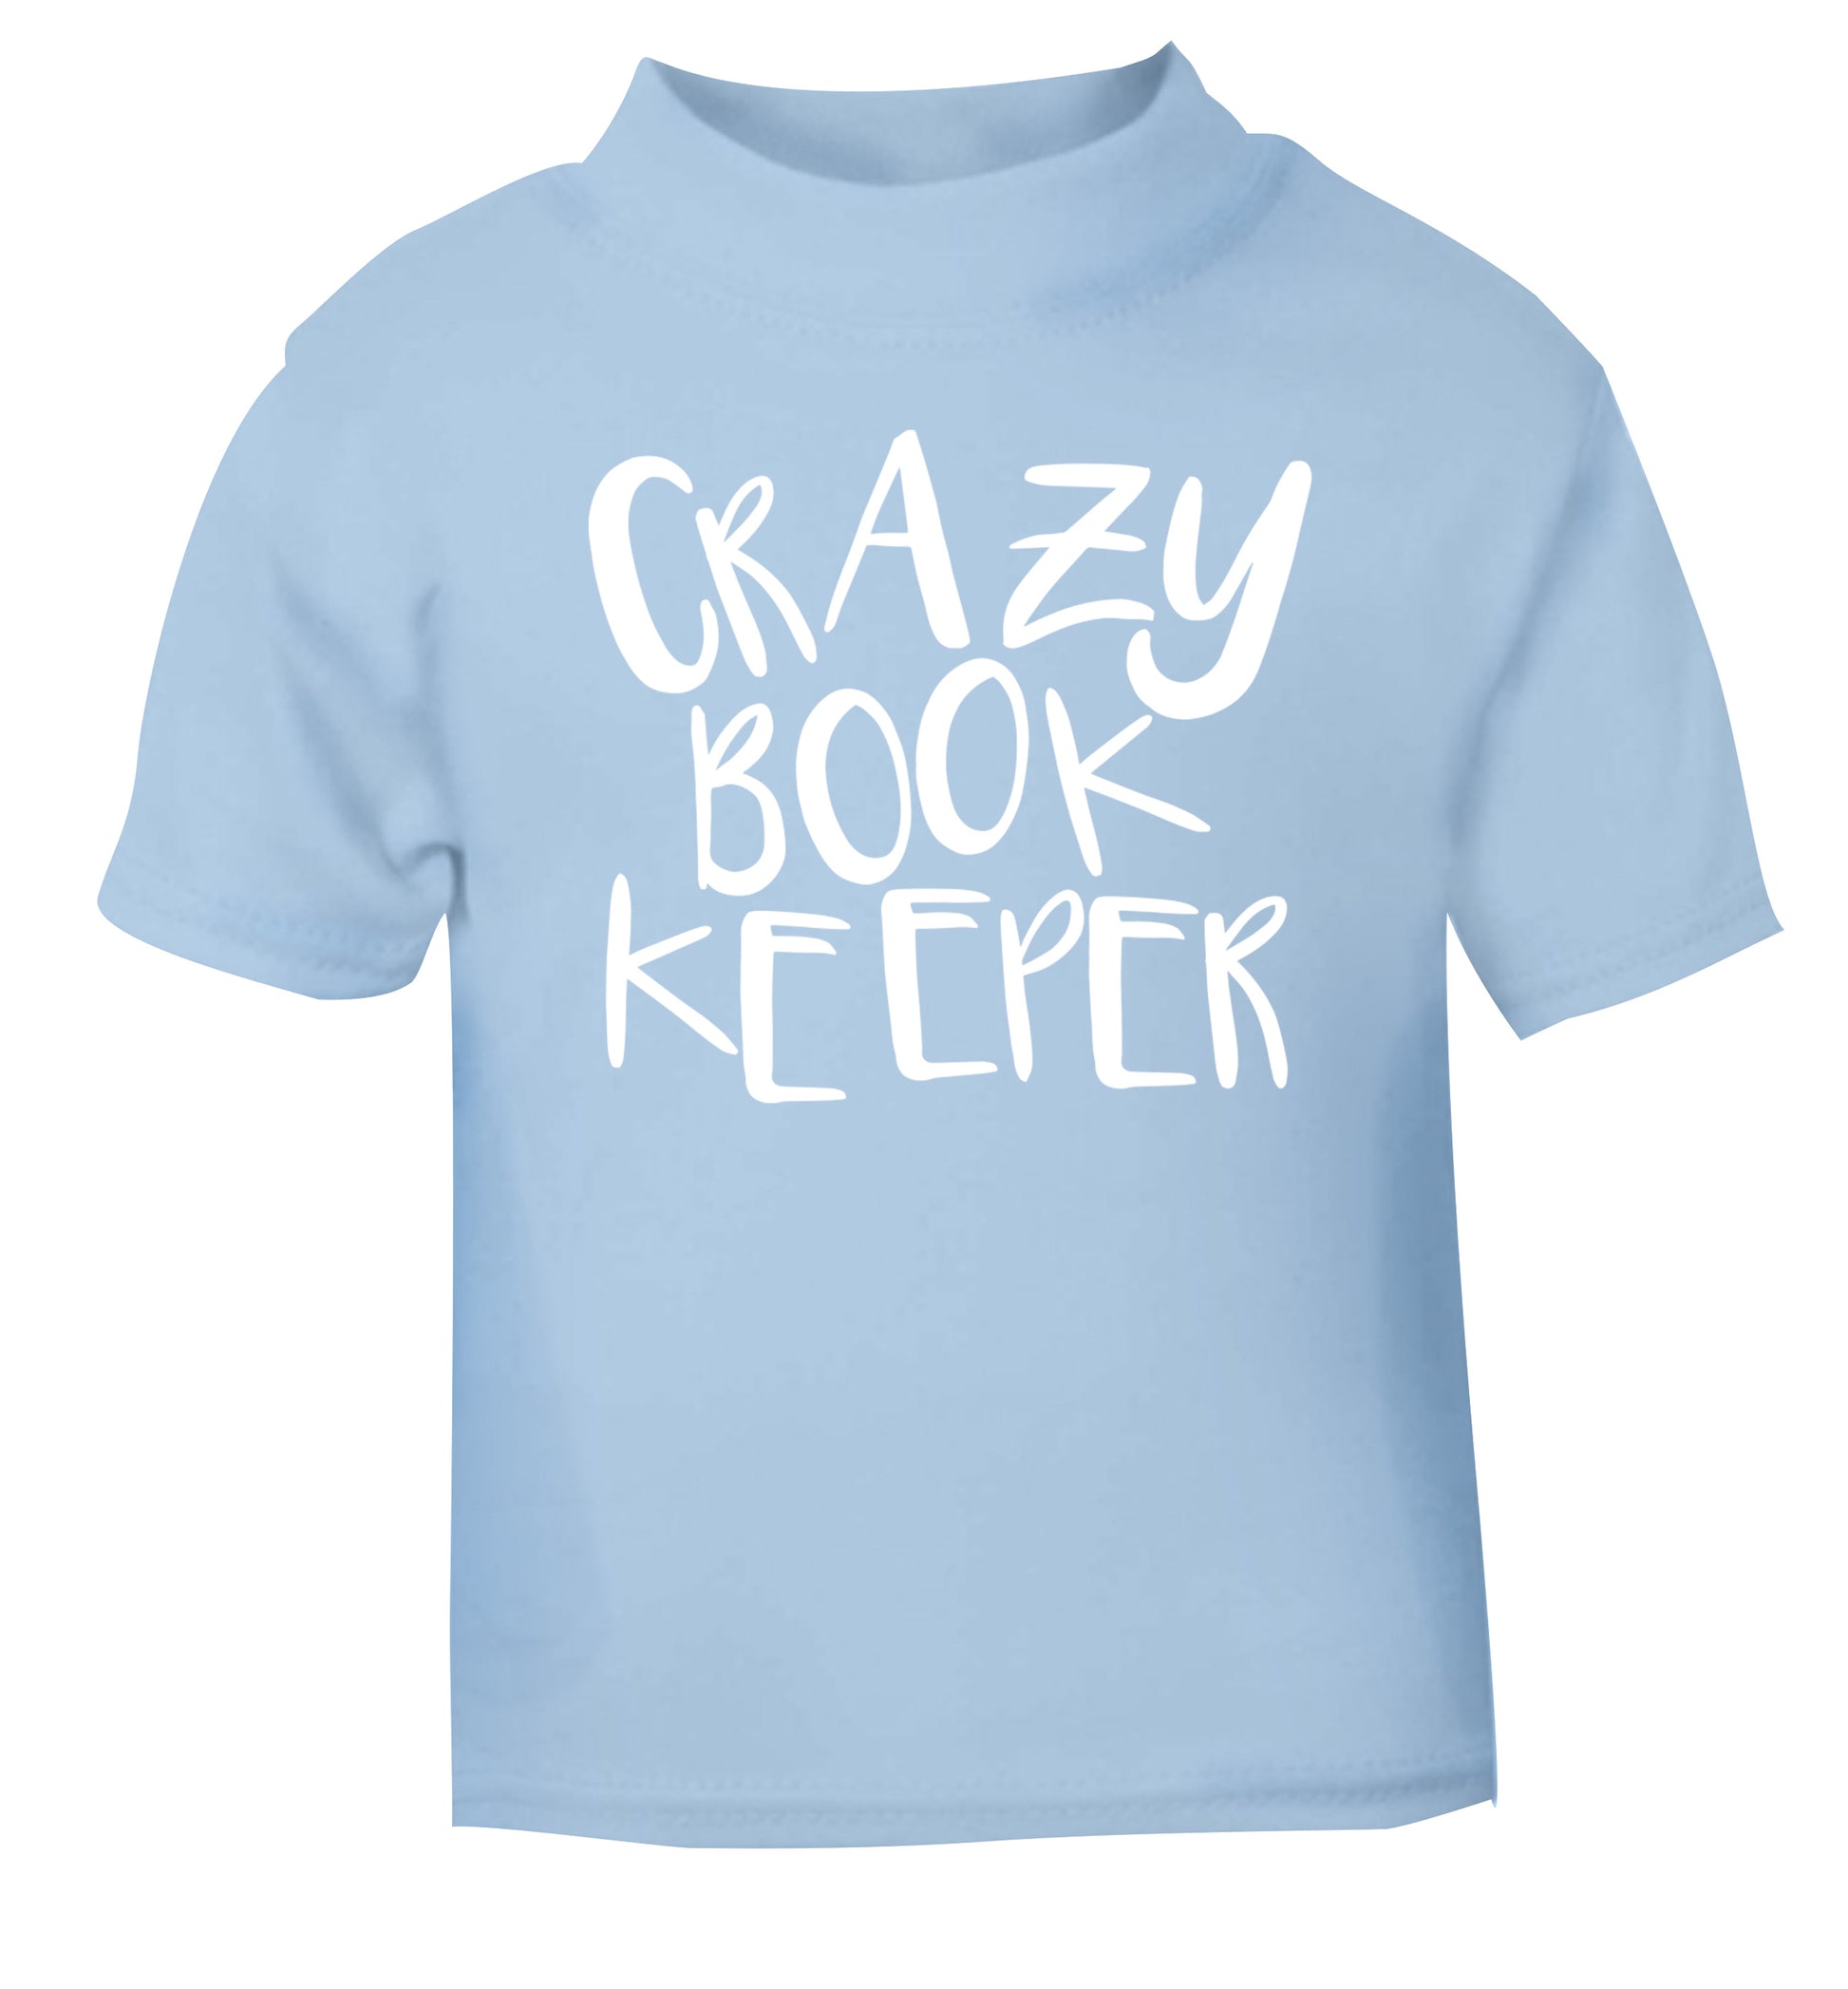 Crazy bookkeeper light blue Baby Toddler Tshirt 2 Years